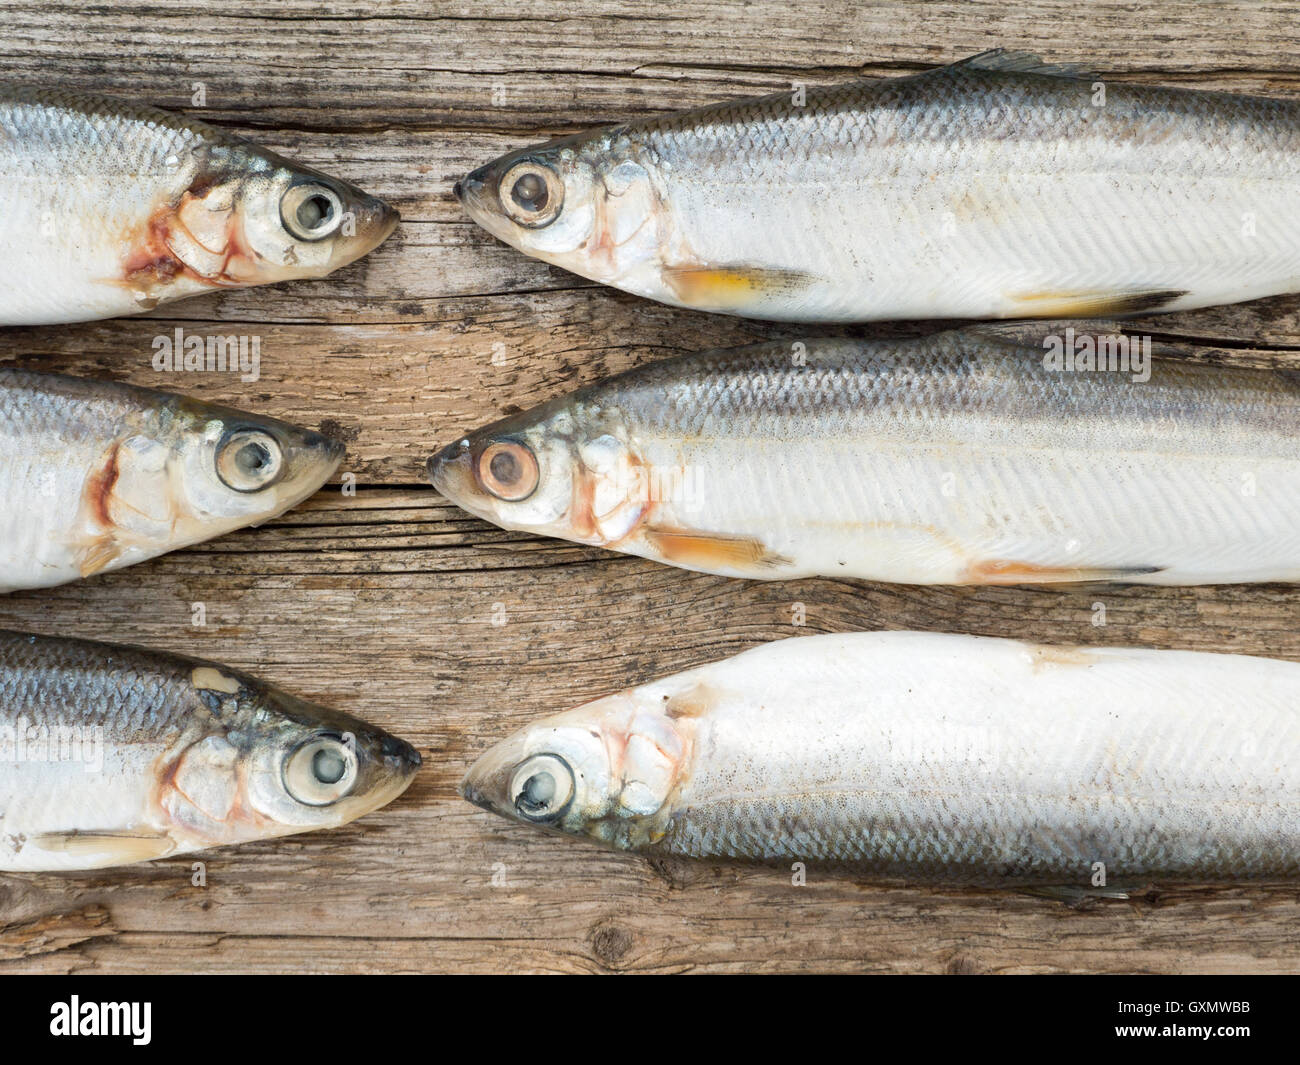 Vendace fishes on the old weathered wooden board Stock Photo